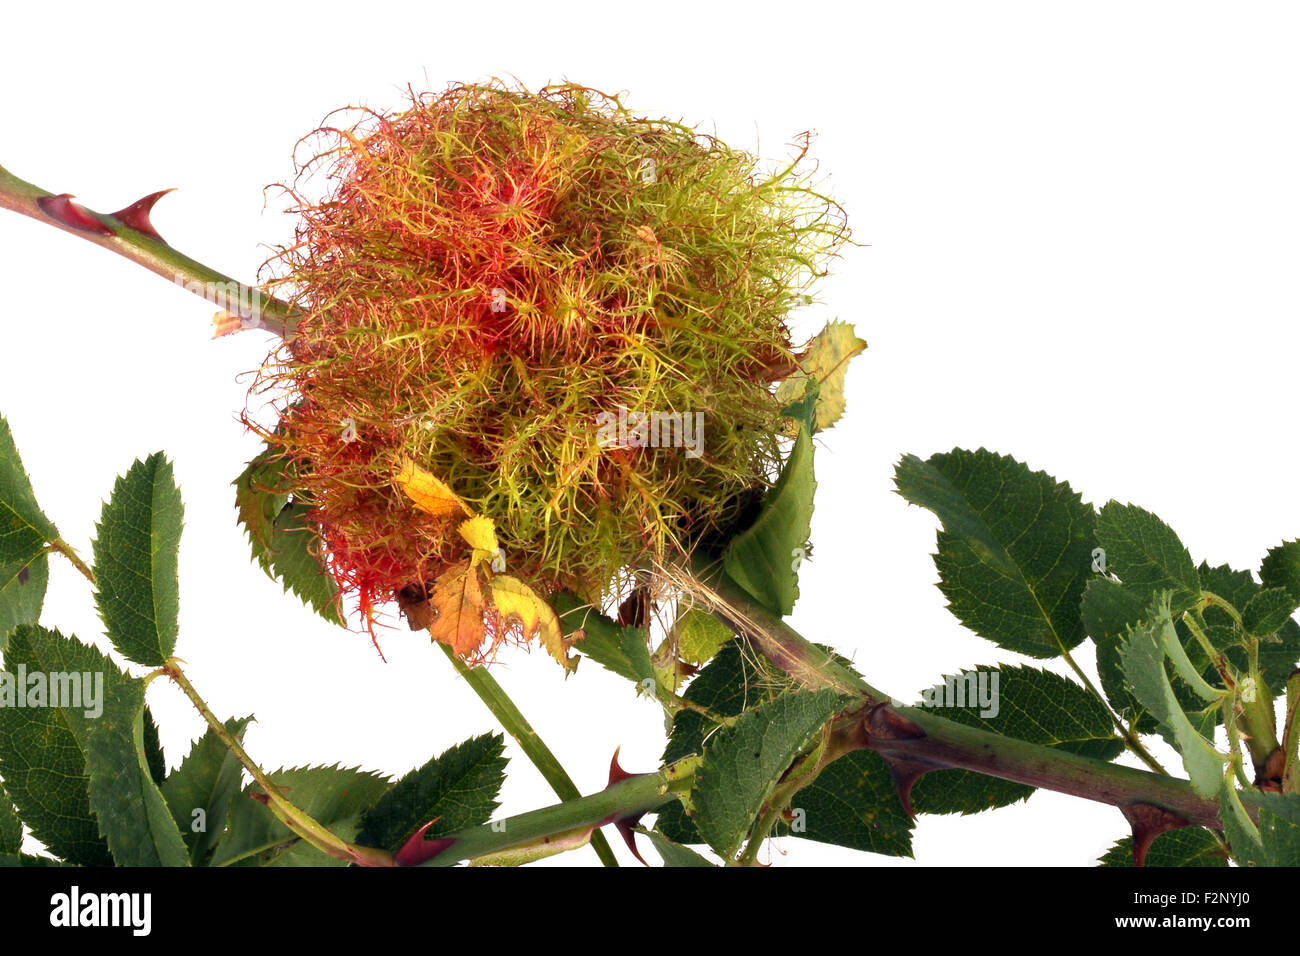 Gall made for winter protection by a Rose Stem gall wasp. It is about the size of a golf ball. Stock Photo